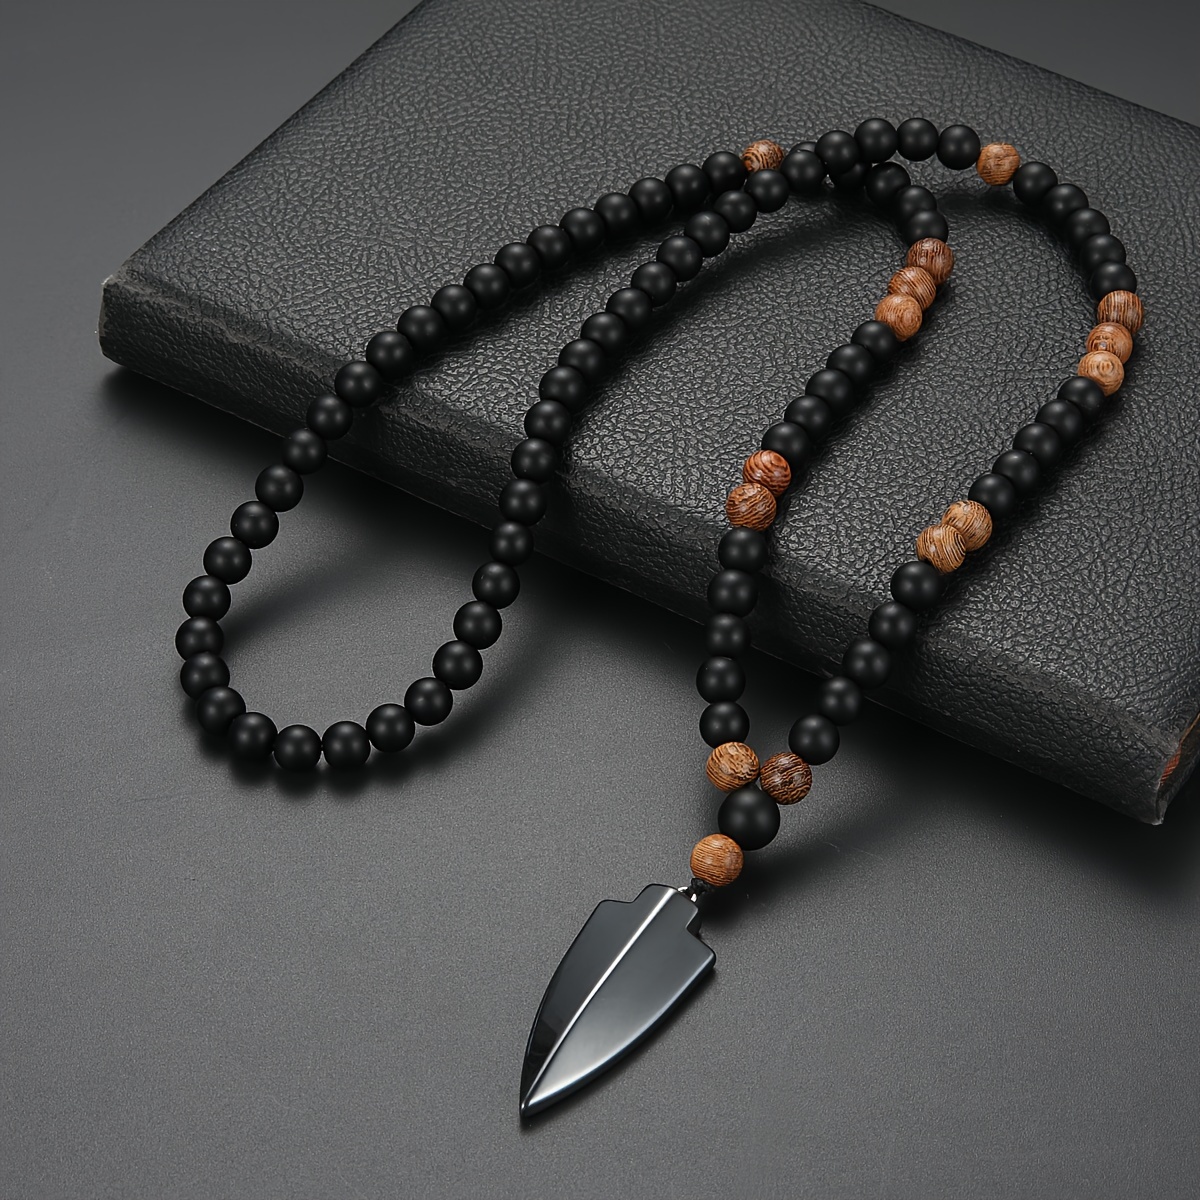 

Arrow Pendant Necklace For Men And Women, Beads Necklace